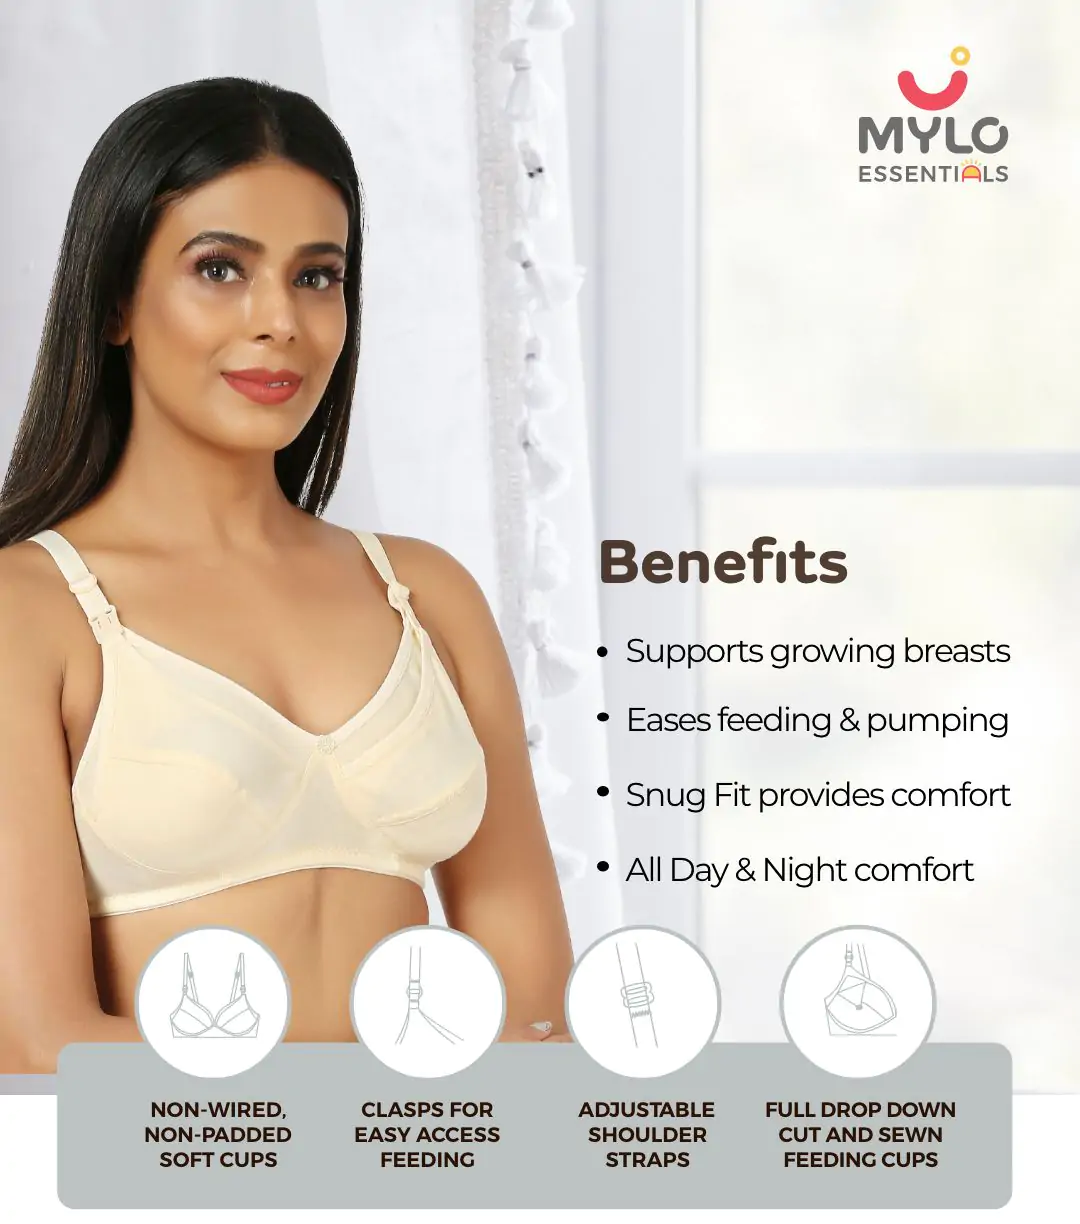 Non-Wired Non-Padded Maternity Bra/Feeding Bra with Free Bra Extender | Supports Growing Breasts | Eases Pumping & Feeding | Classic Black, Classic White, Magnolia Cream 38B about banner